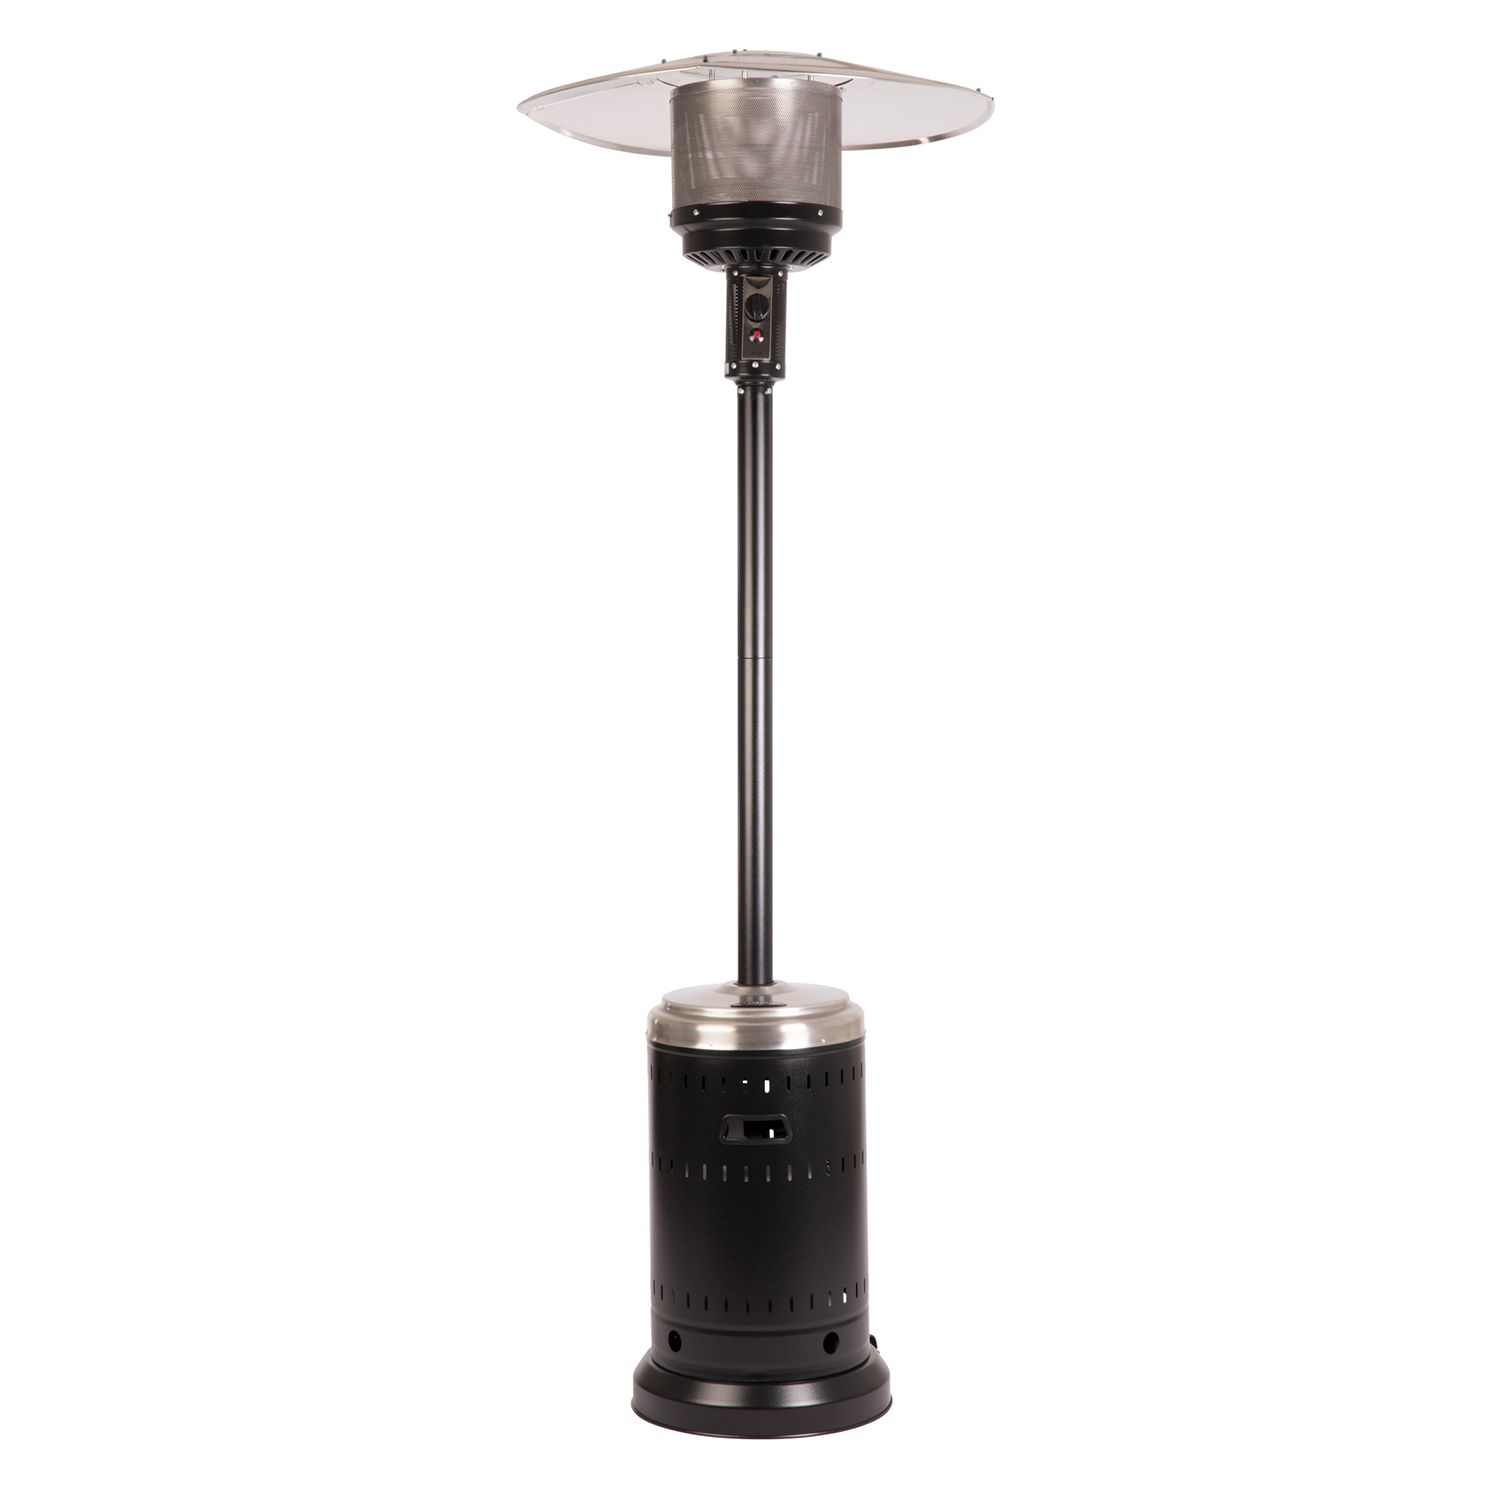 Fire Sense 46,000 BTU Patio Heater in Onyx and Stainless Steel